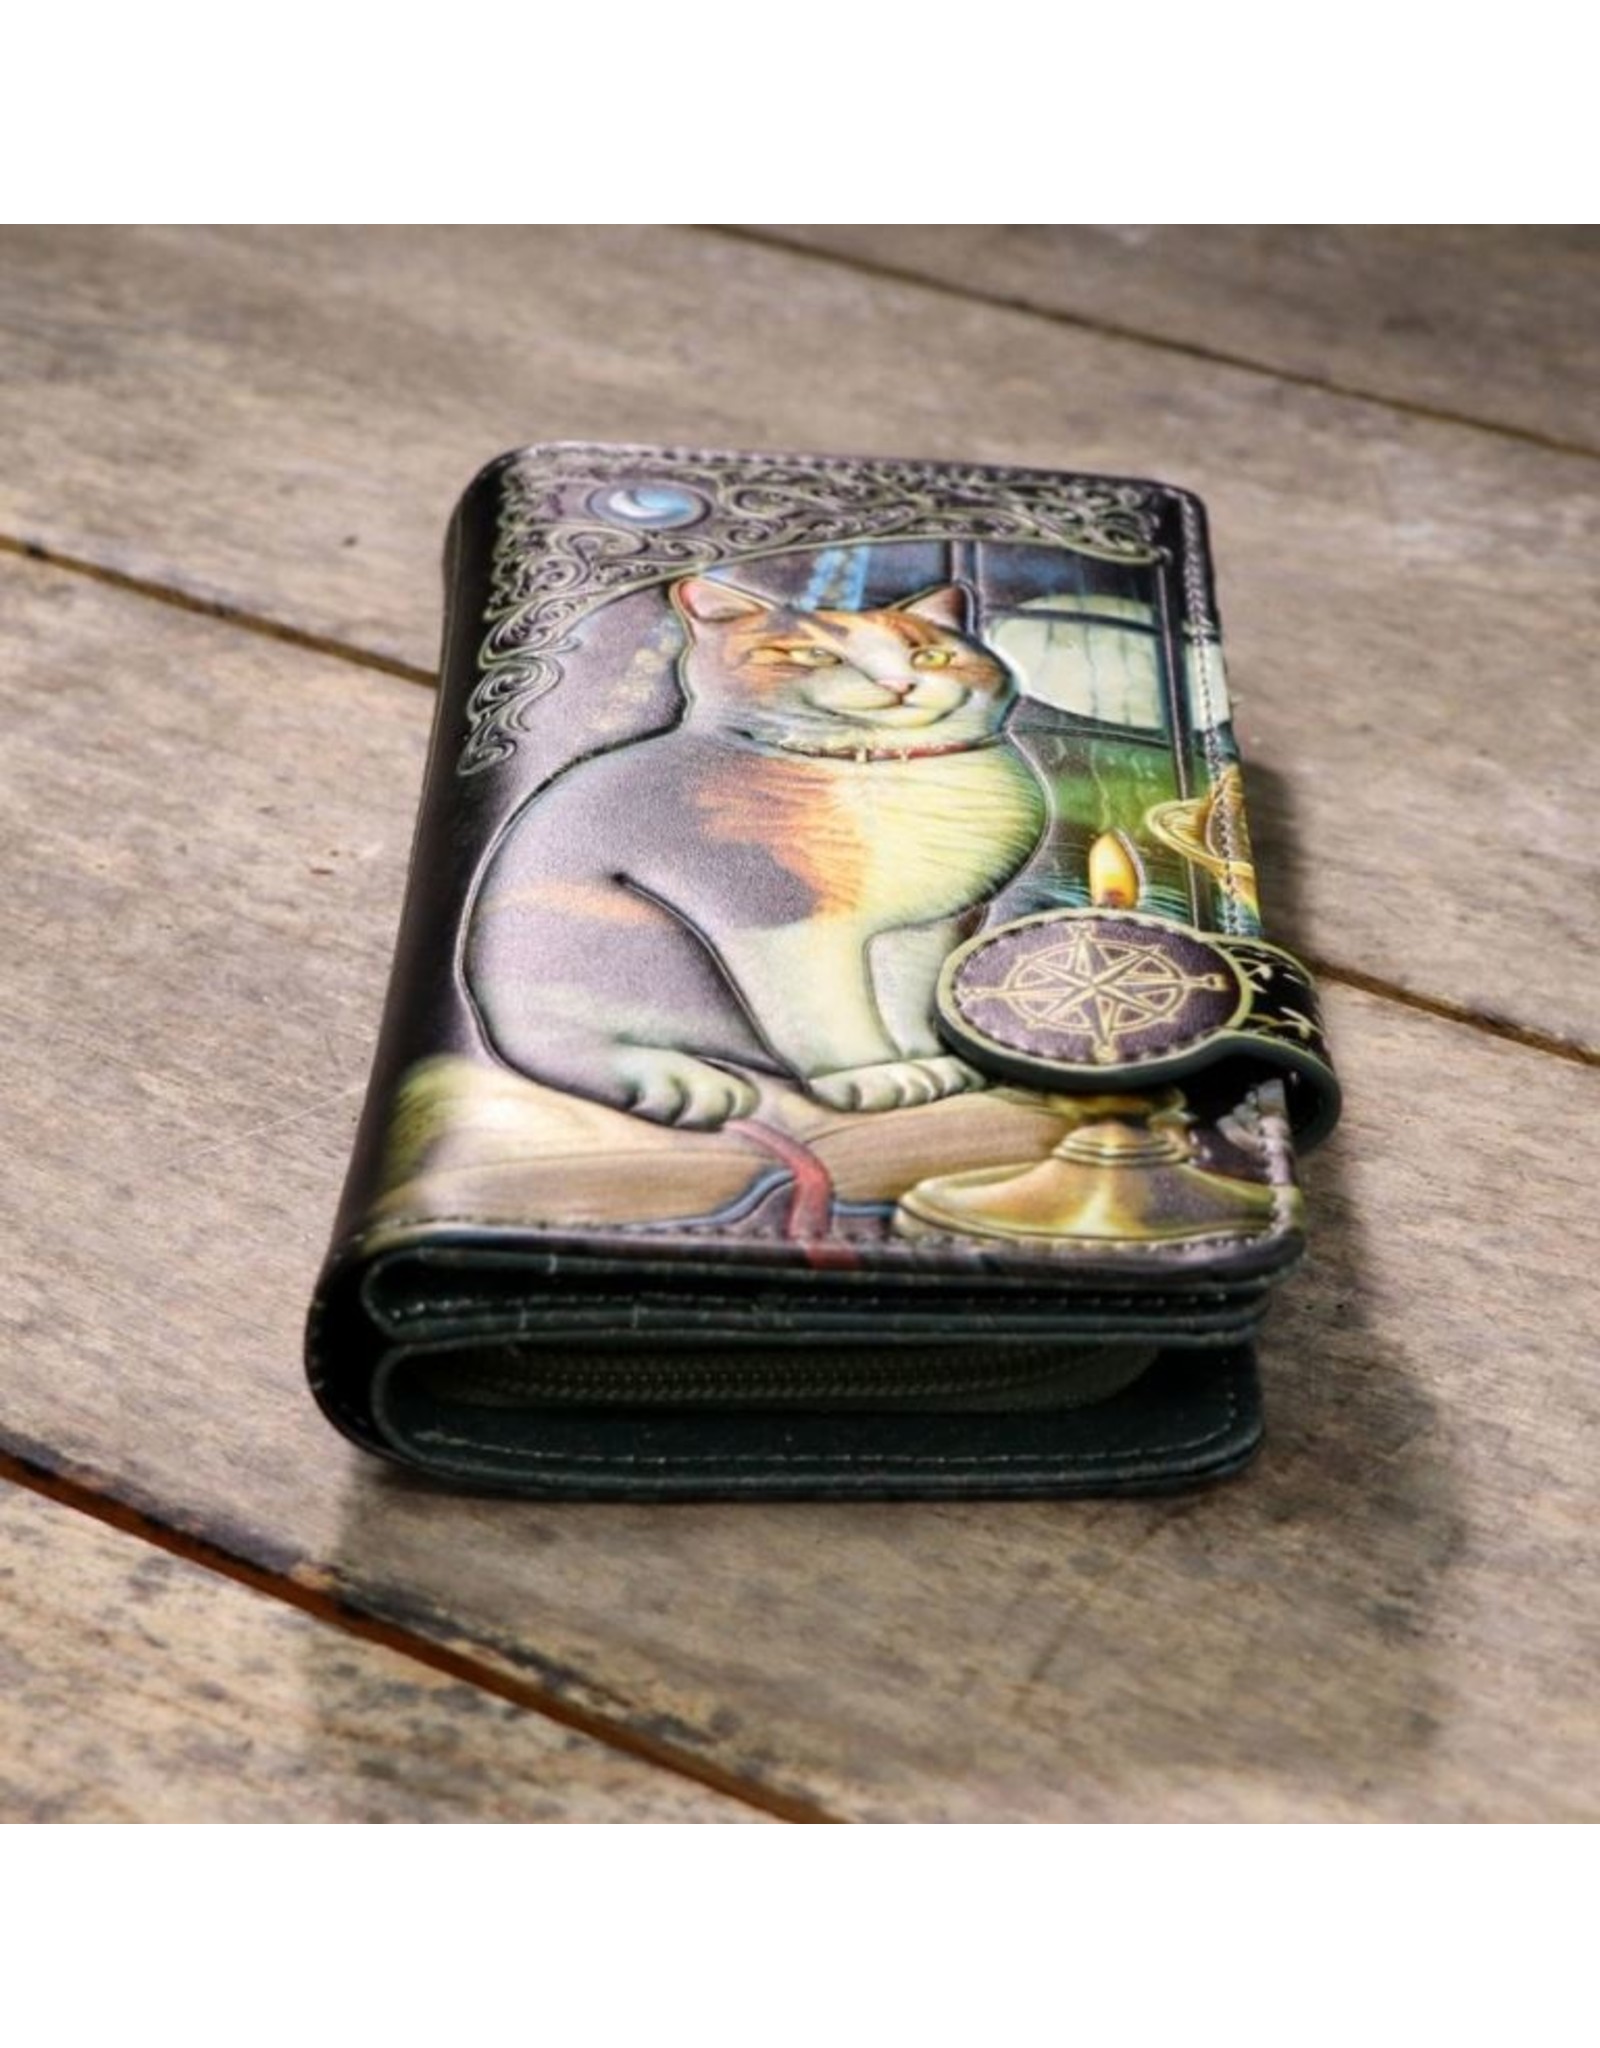 NemesisNow Gothic wallets and purses - Lisa Parker Adventure Awaits Calico Cat Ship Embossed Purse